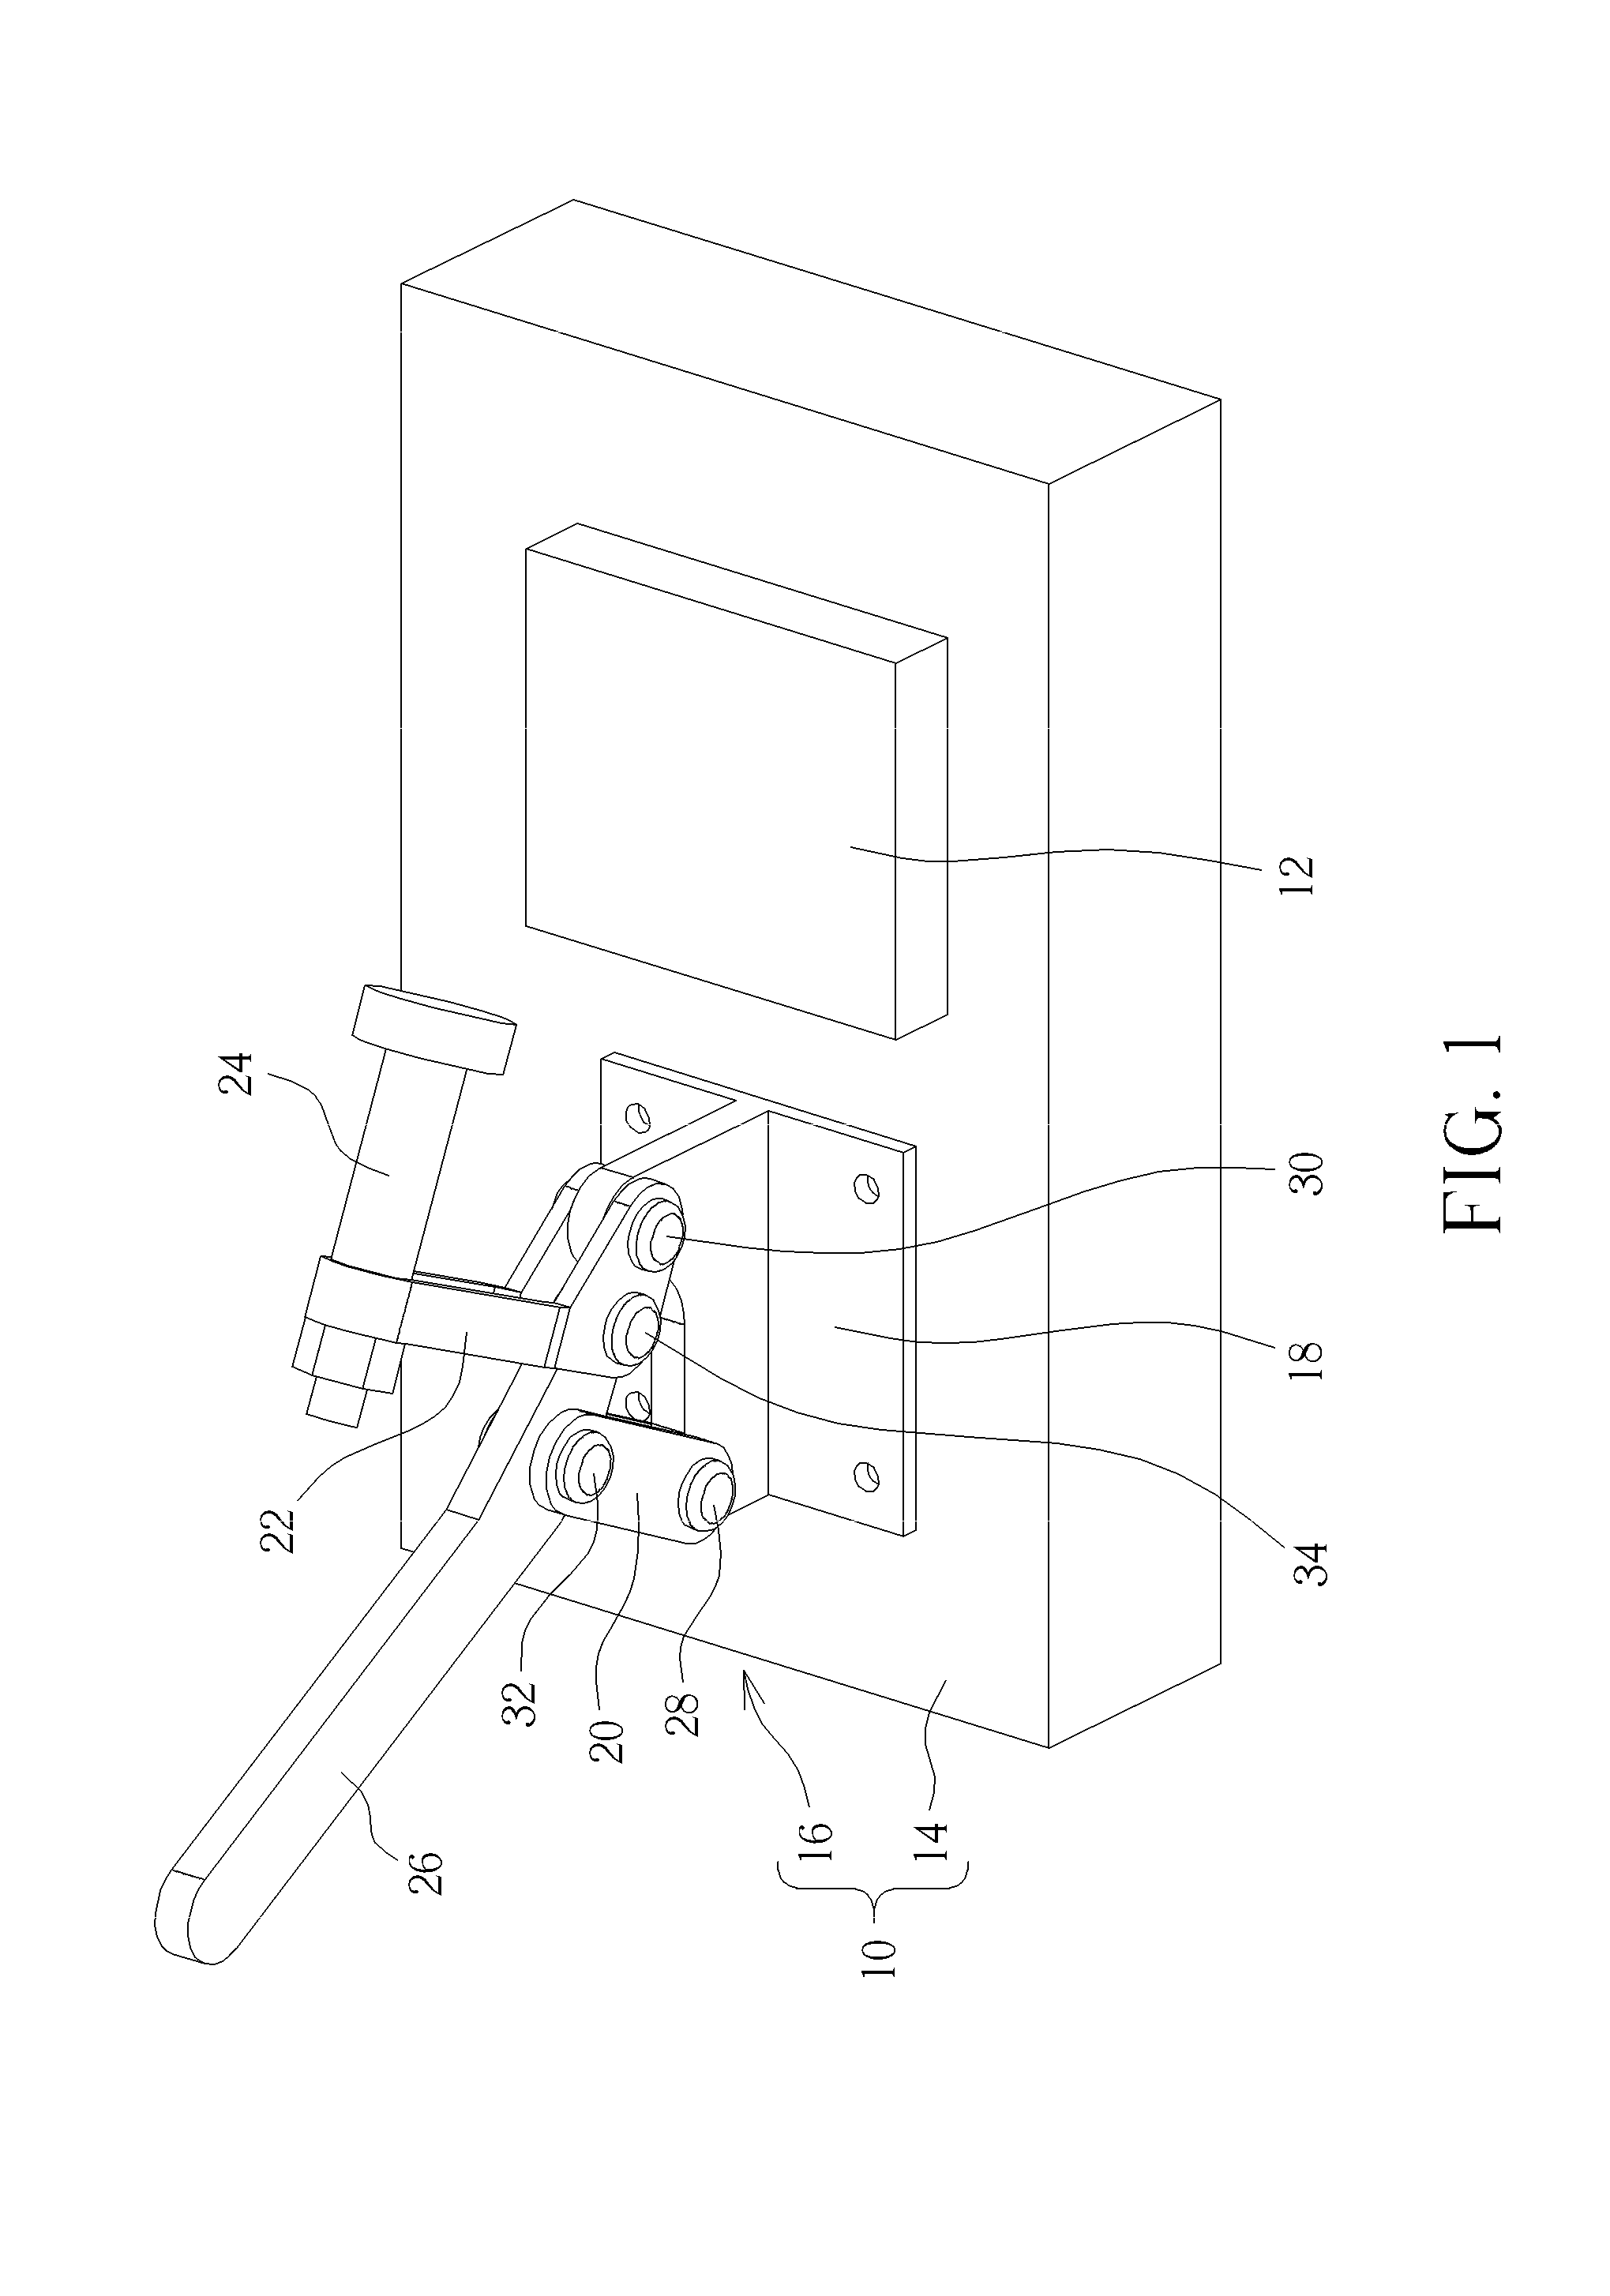 Clamp fixture and related clamp apparatus